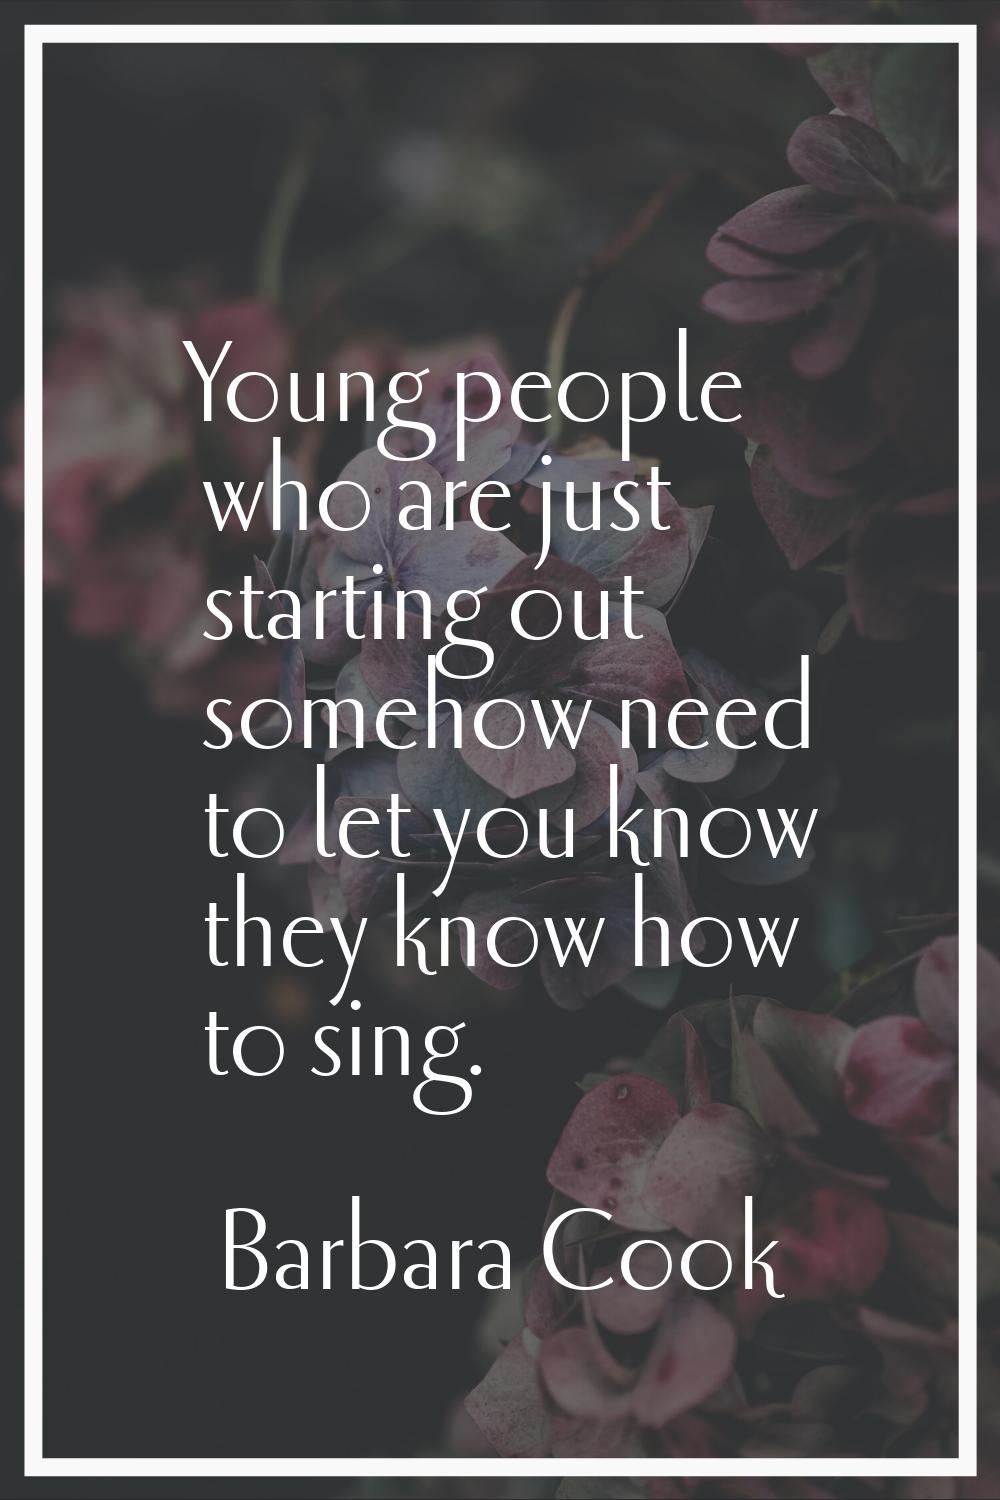 Young people who are just starting out somehow need to let you know they know how to sing.